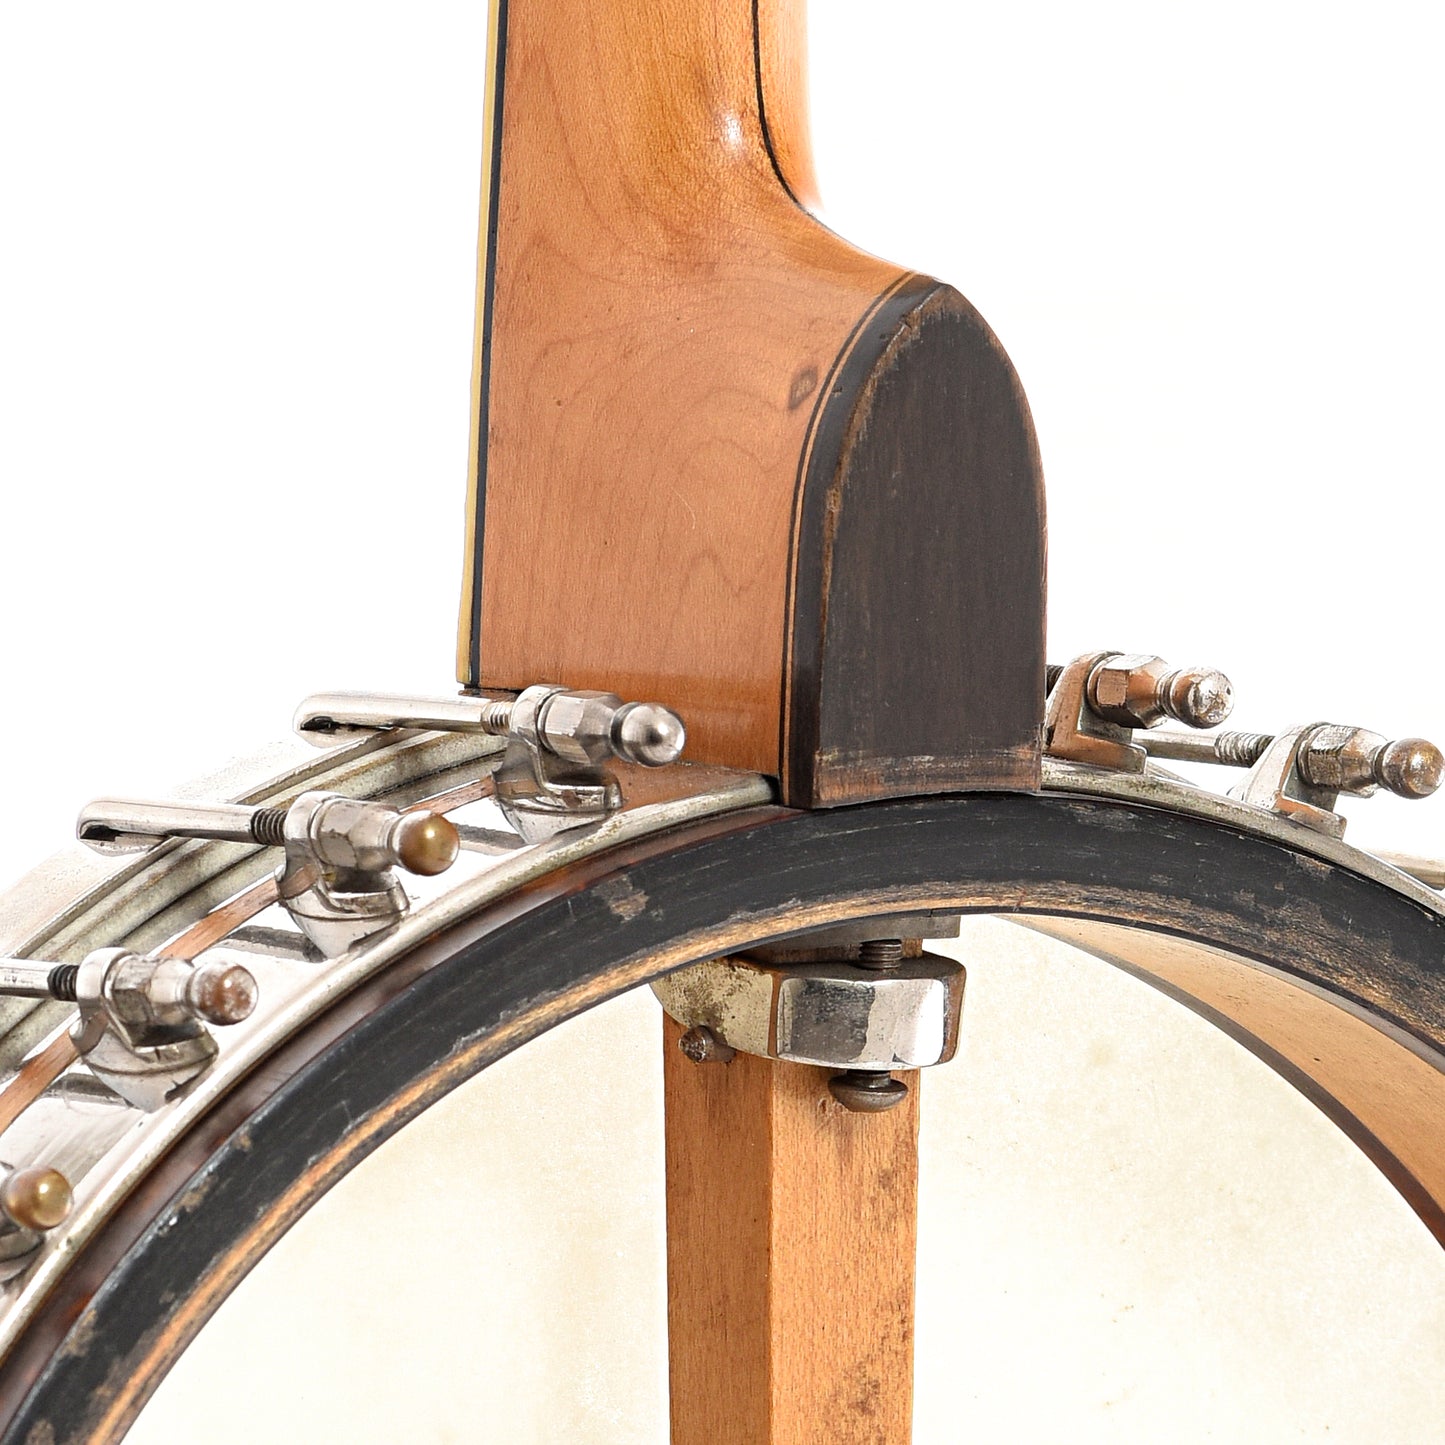 Neck joint of Vega Whyte Laydie Style R Tenor Banjo (1921)